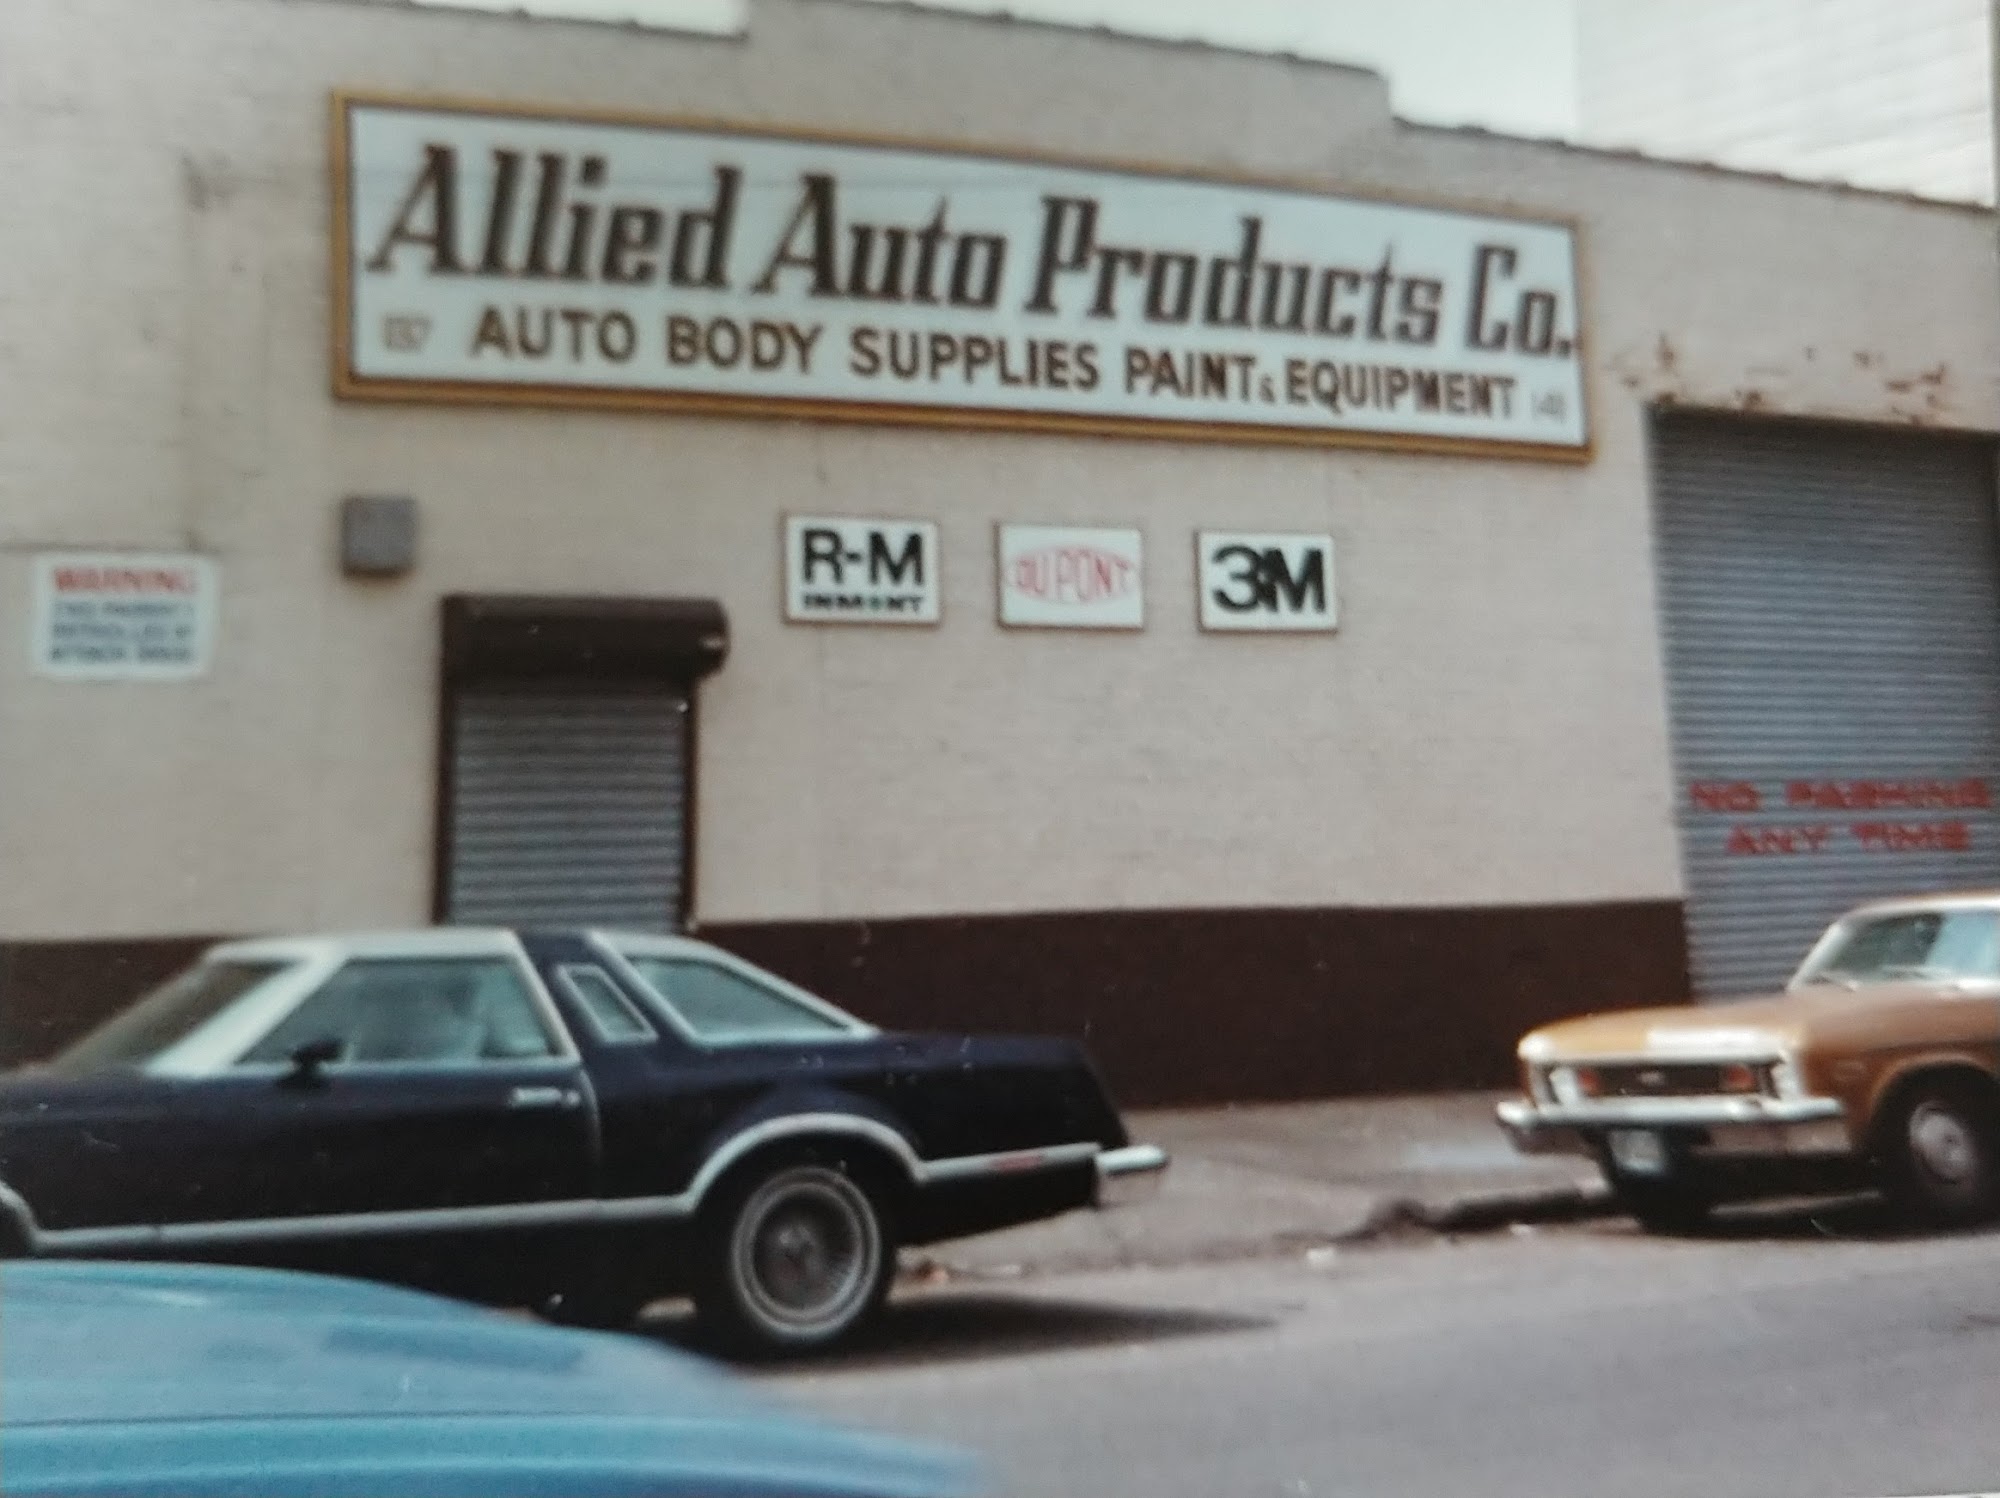 AAP Corporation-Allied Auto Product